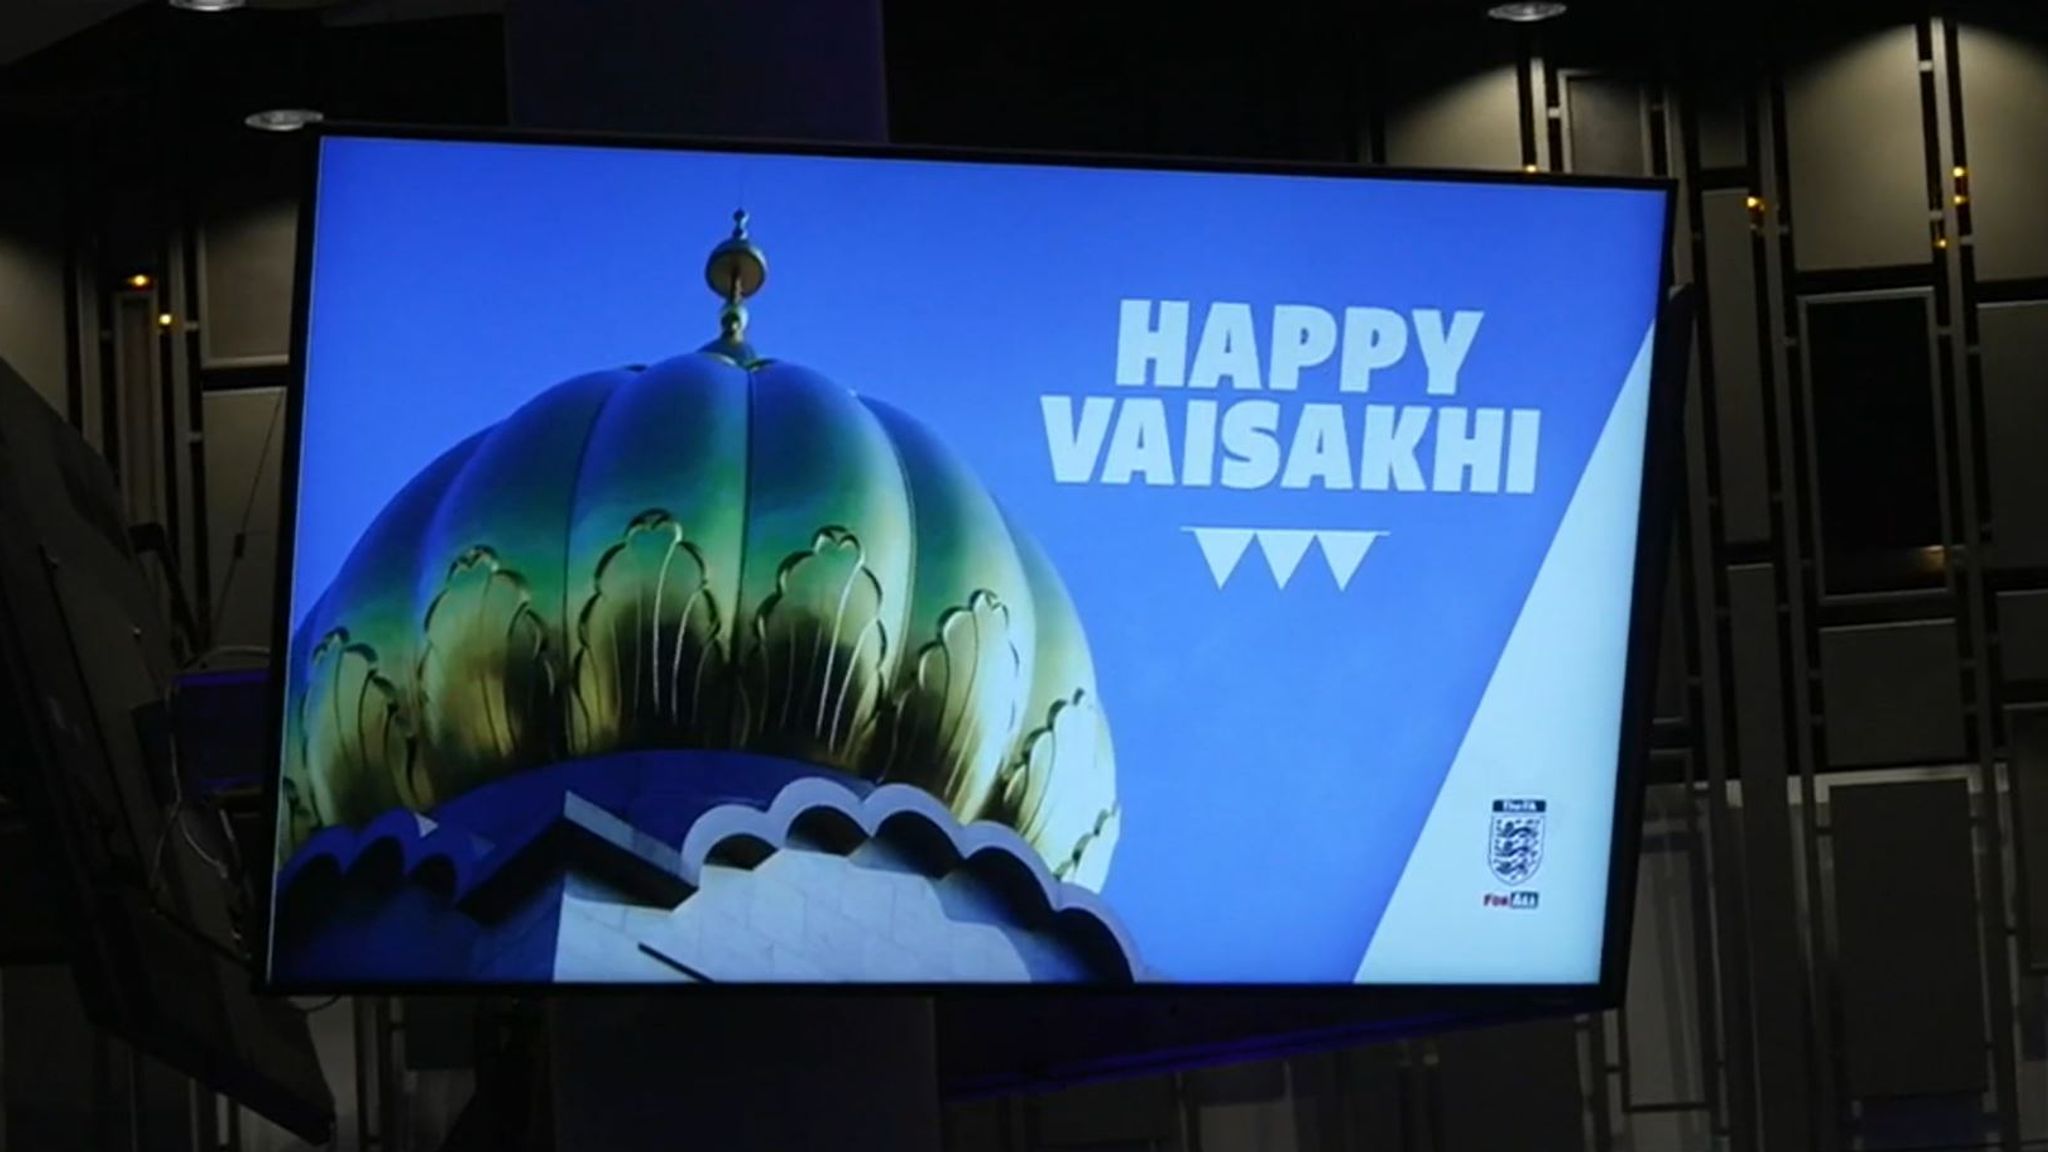 Vaisakhi Sikh festival celebrated by hundreds at Wembley for the first